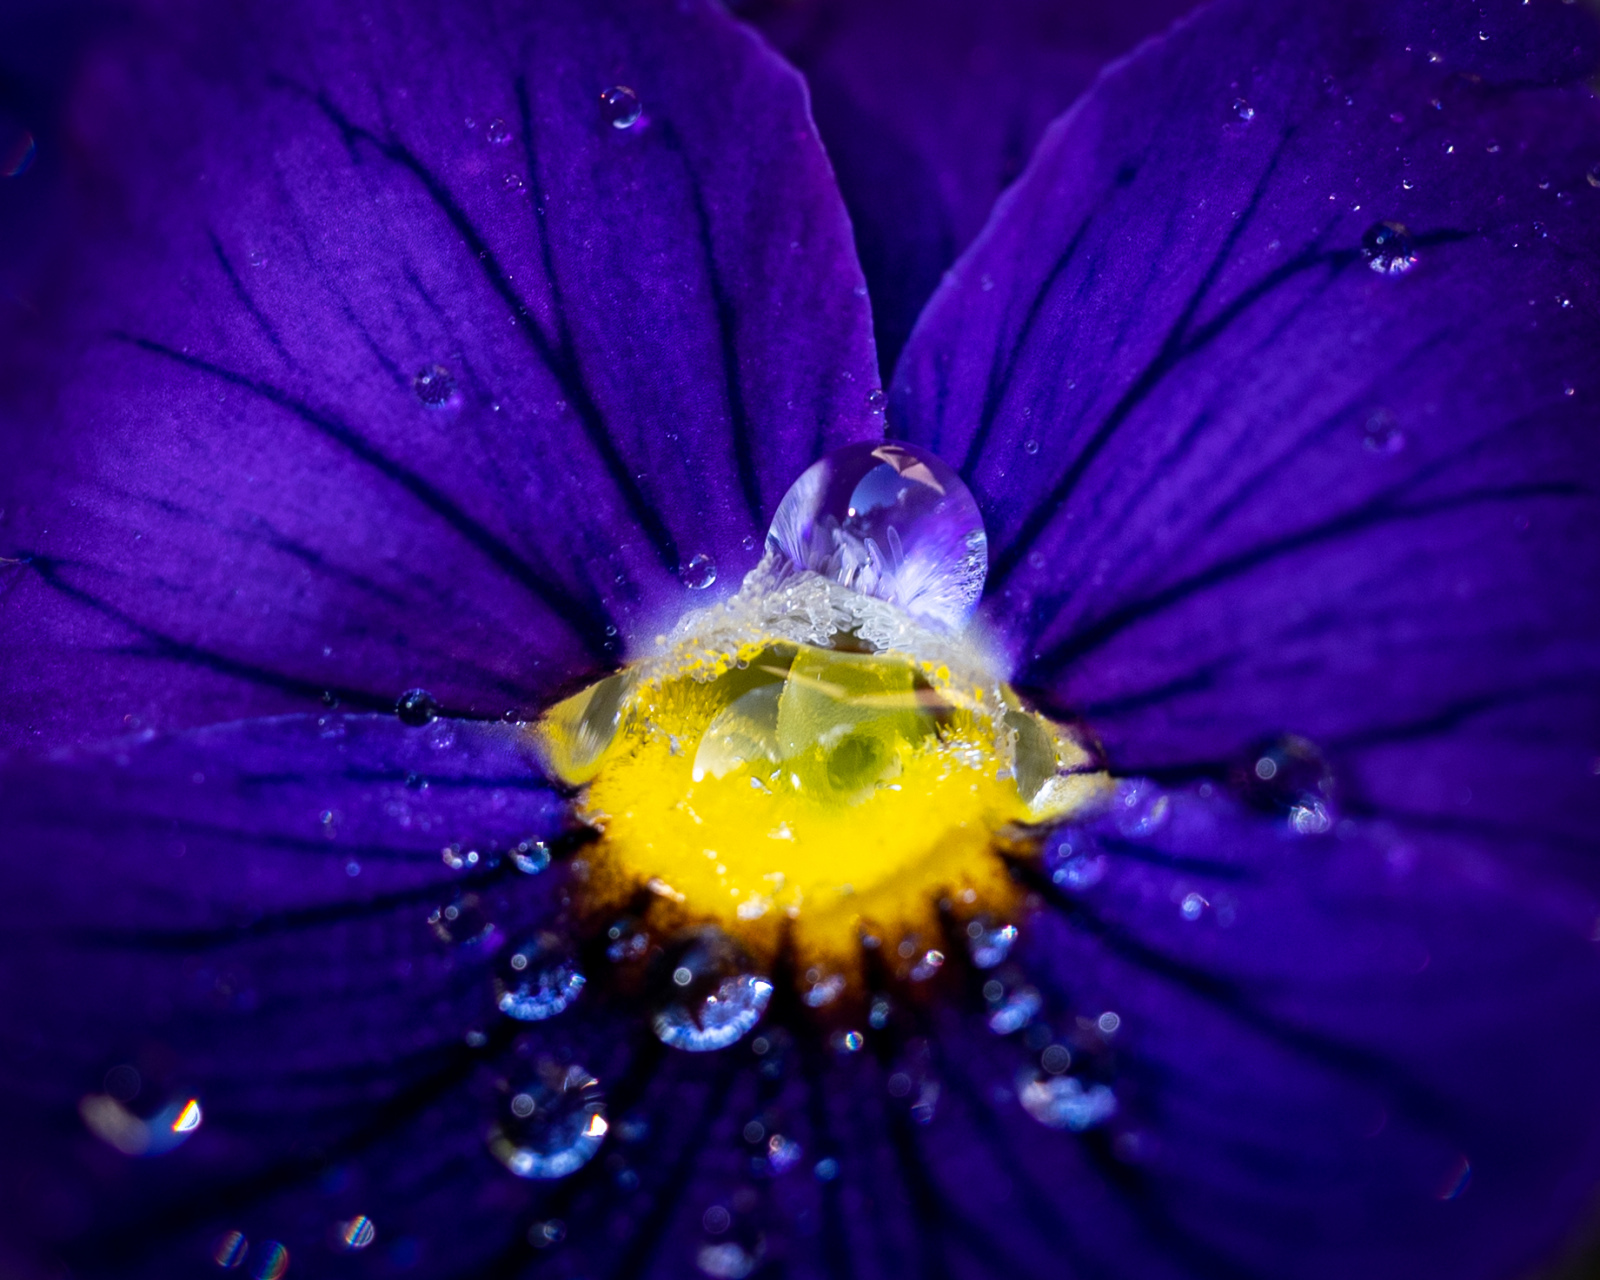 pansy magnification